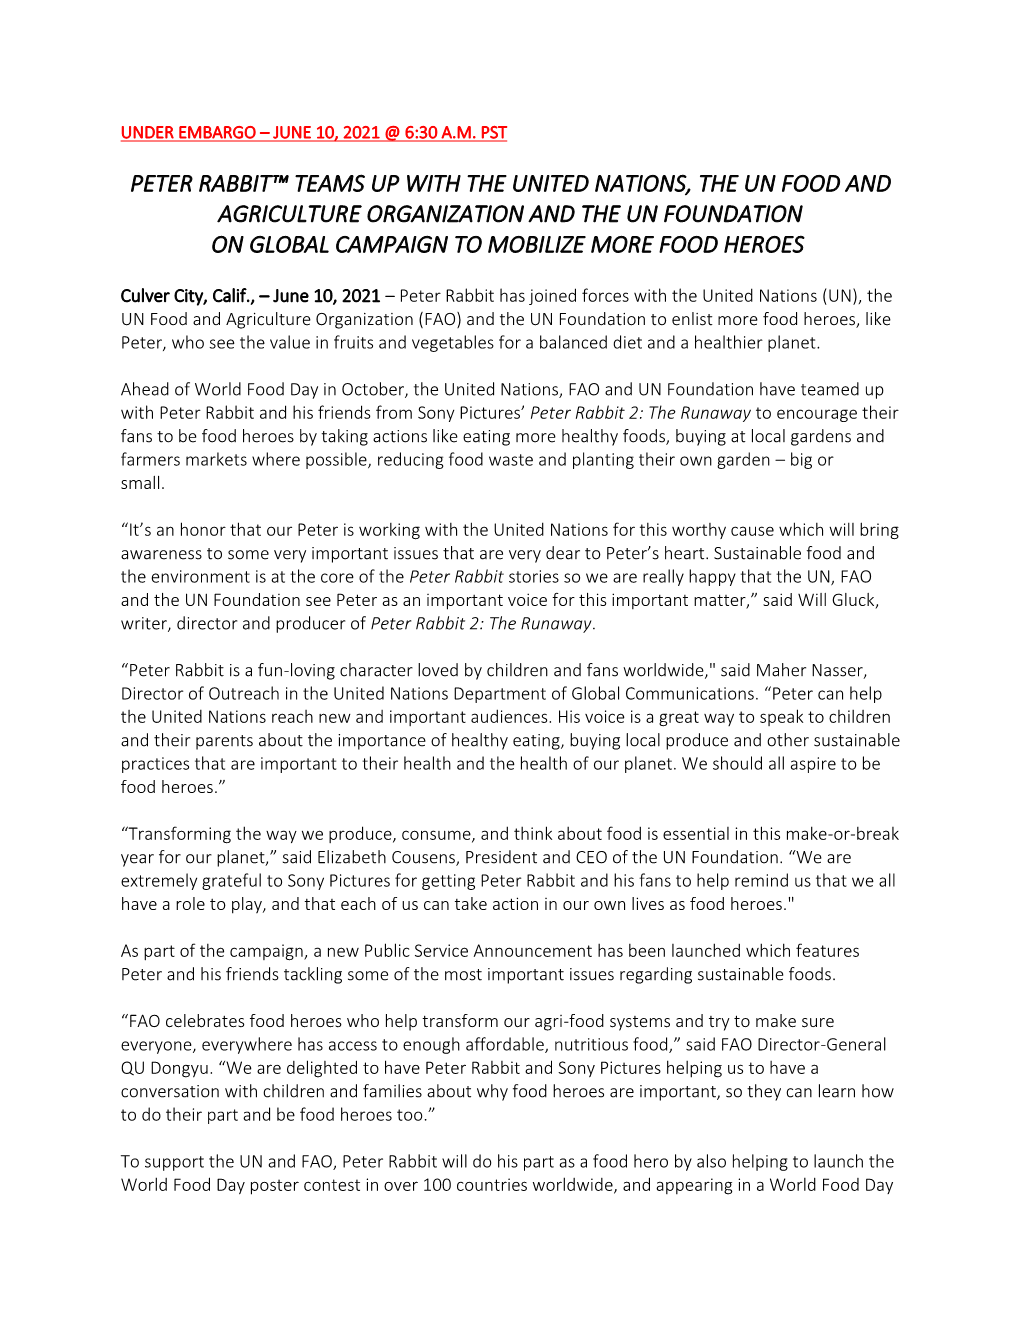 Peter Rabbit™ Teams up with the United Nations, the Un Food and Agriculture Organization and the Un Foundation on Global Campaign to Mobilize More Food Heroes